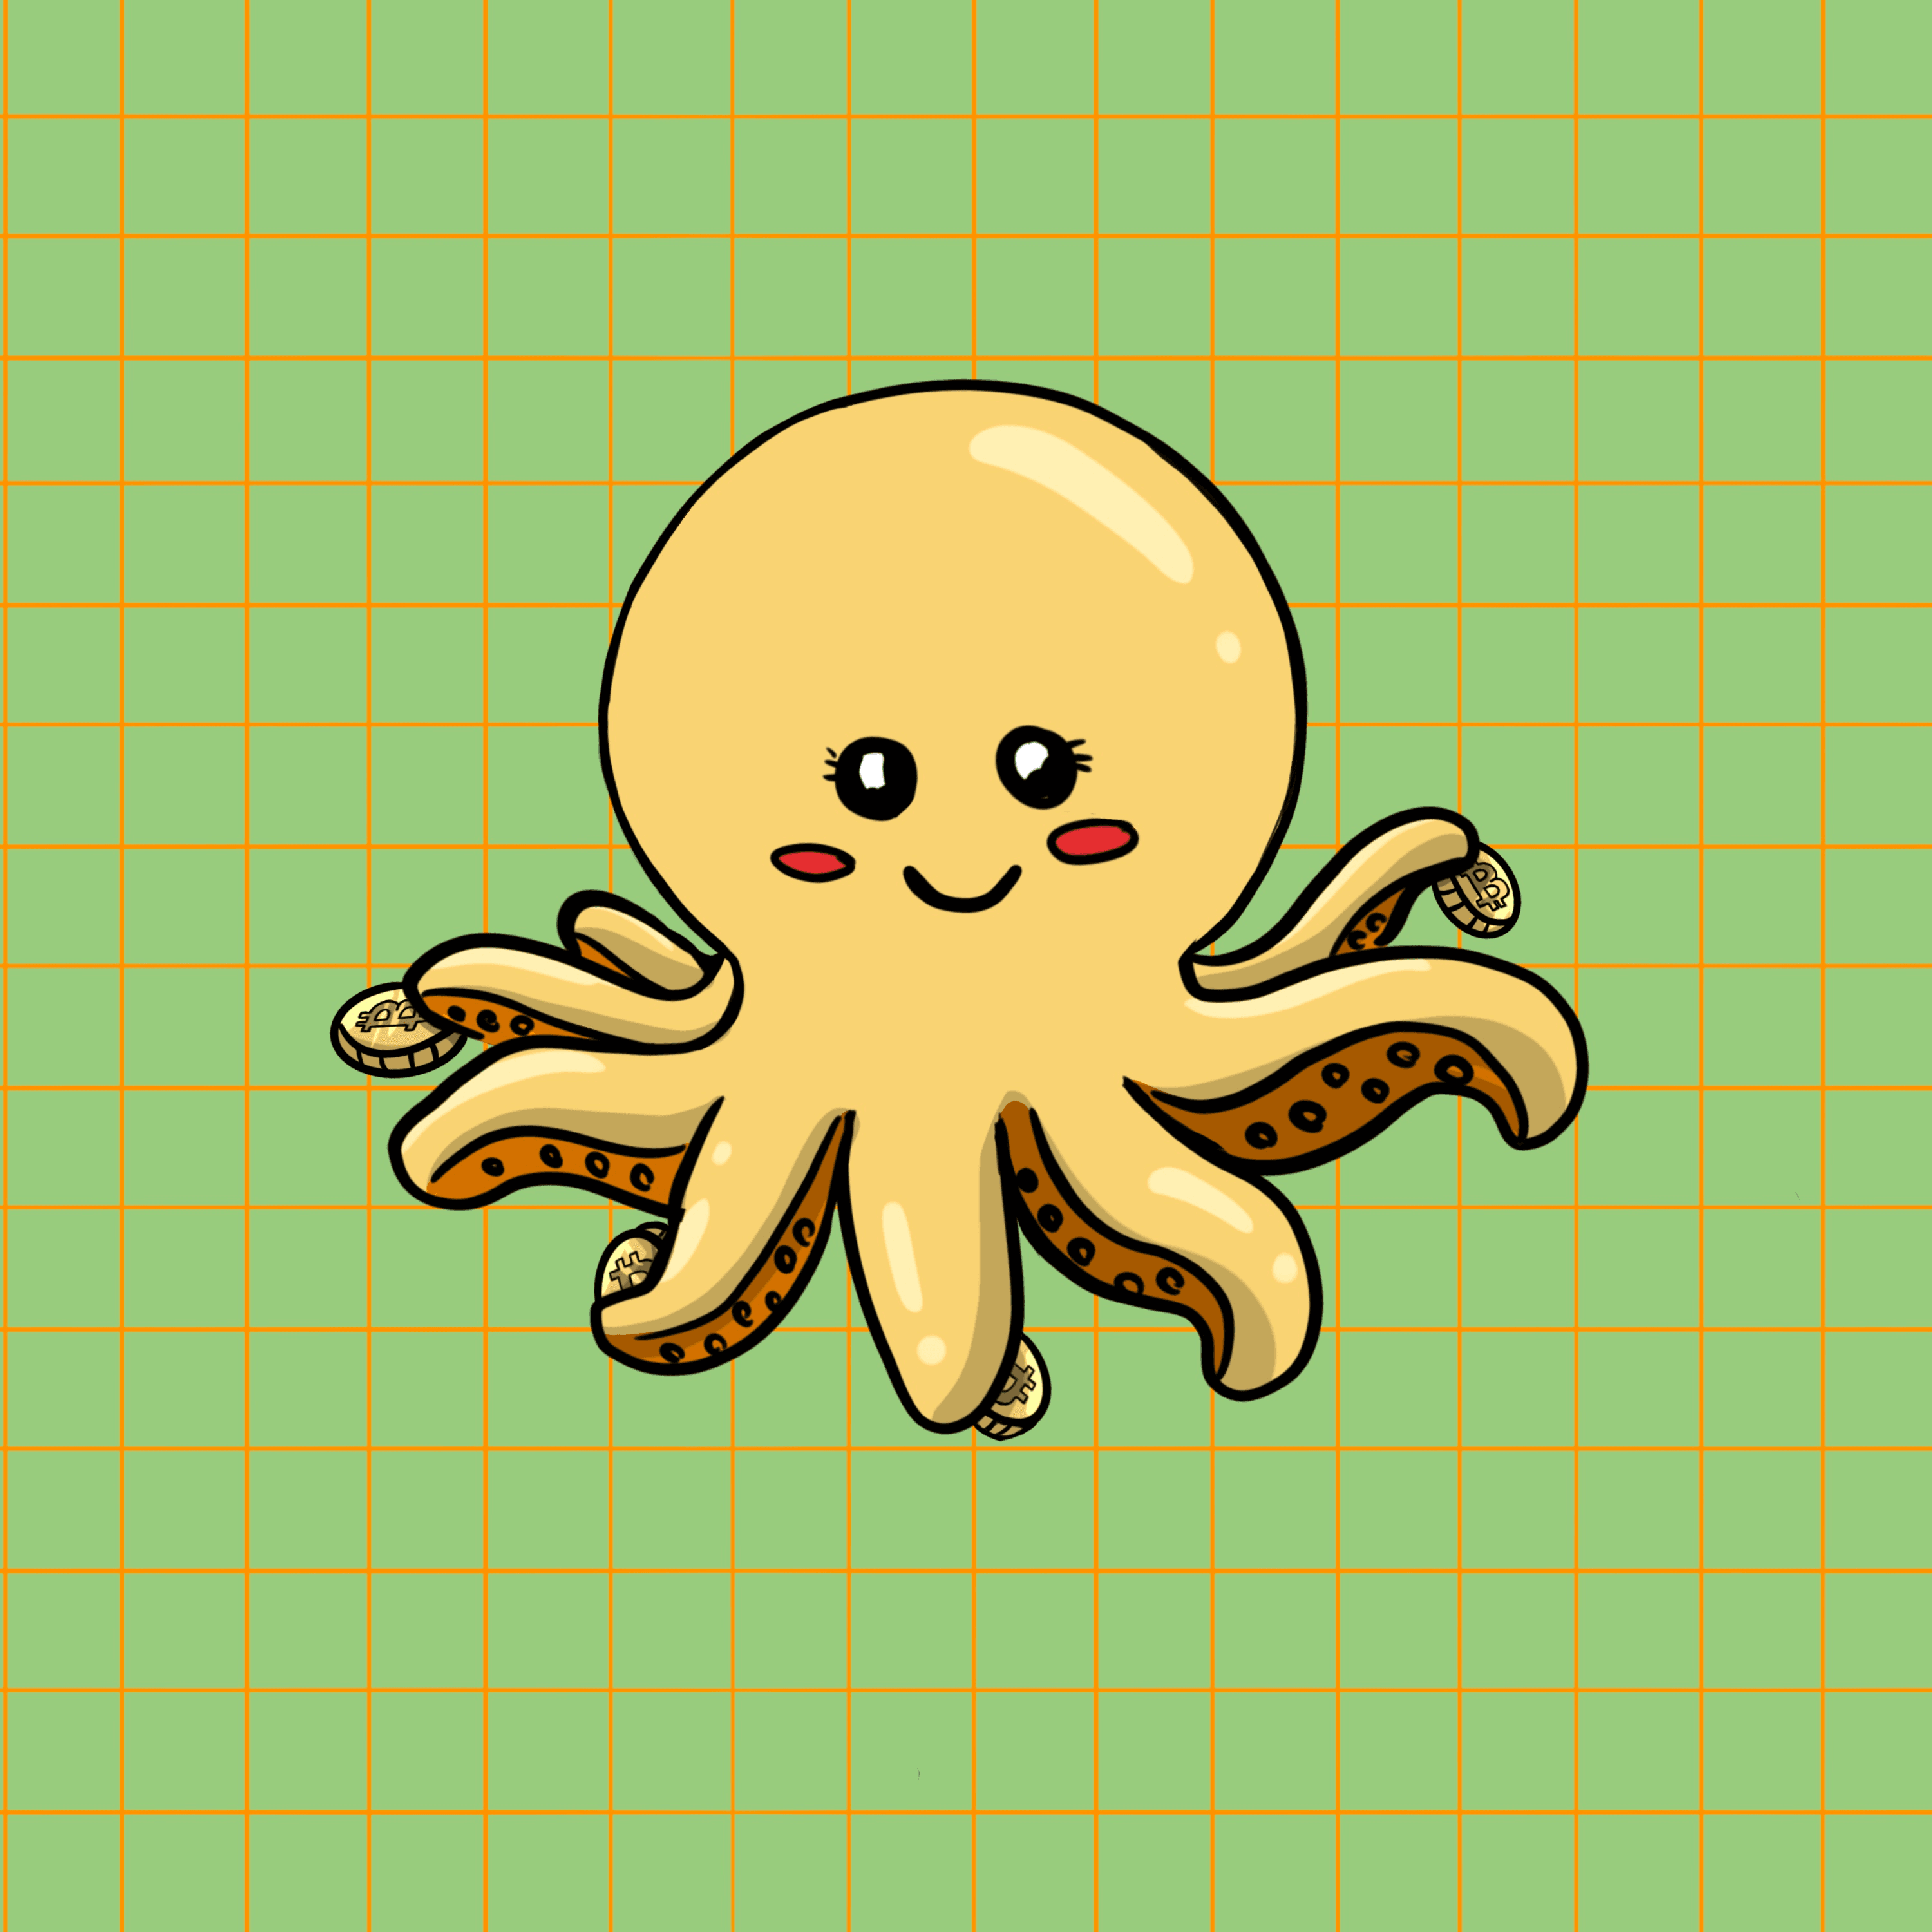 BitFluff - Some-squares-on-the-background Octobuddy